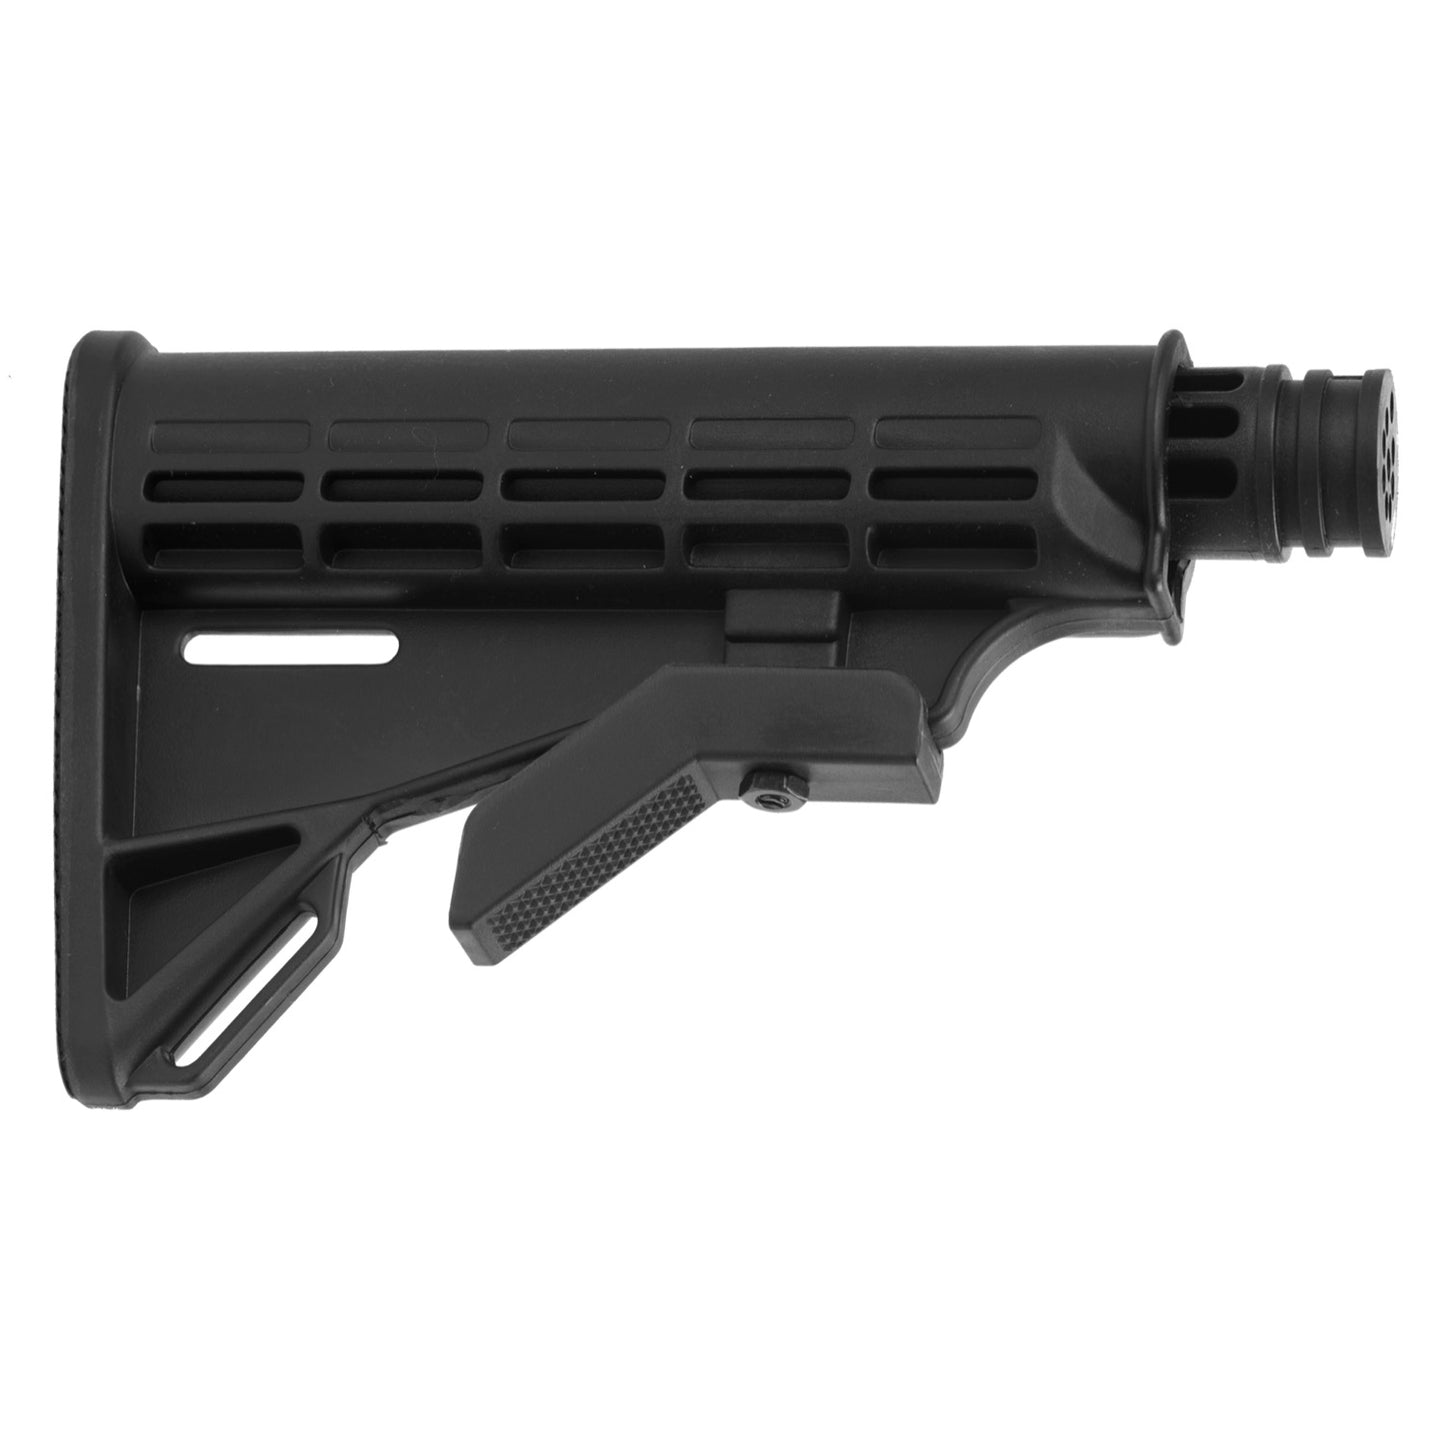 98 Custom Collapsible Stock